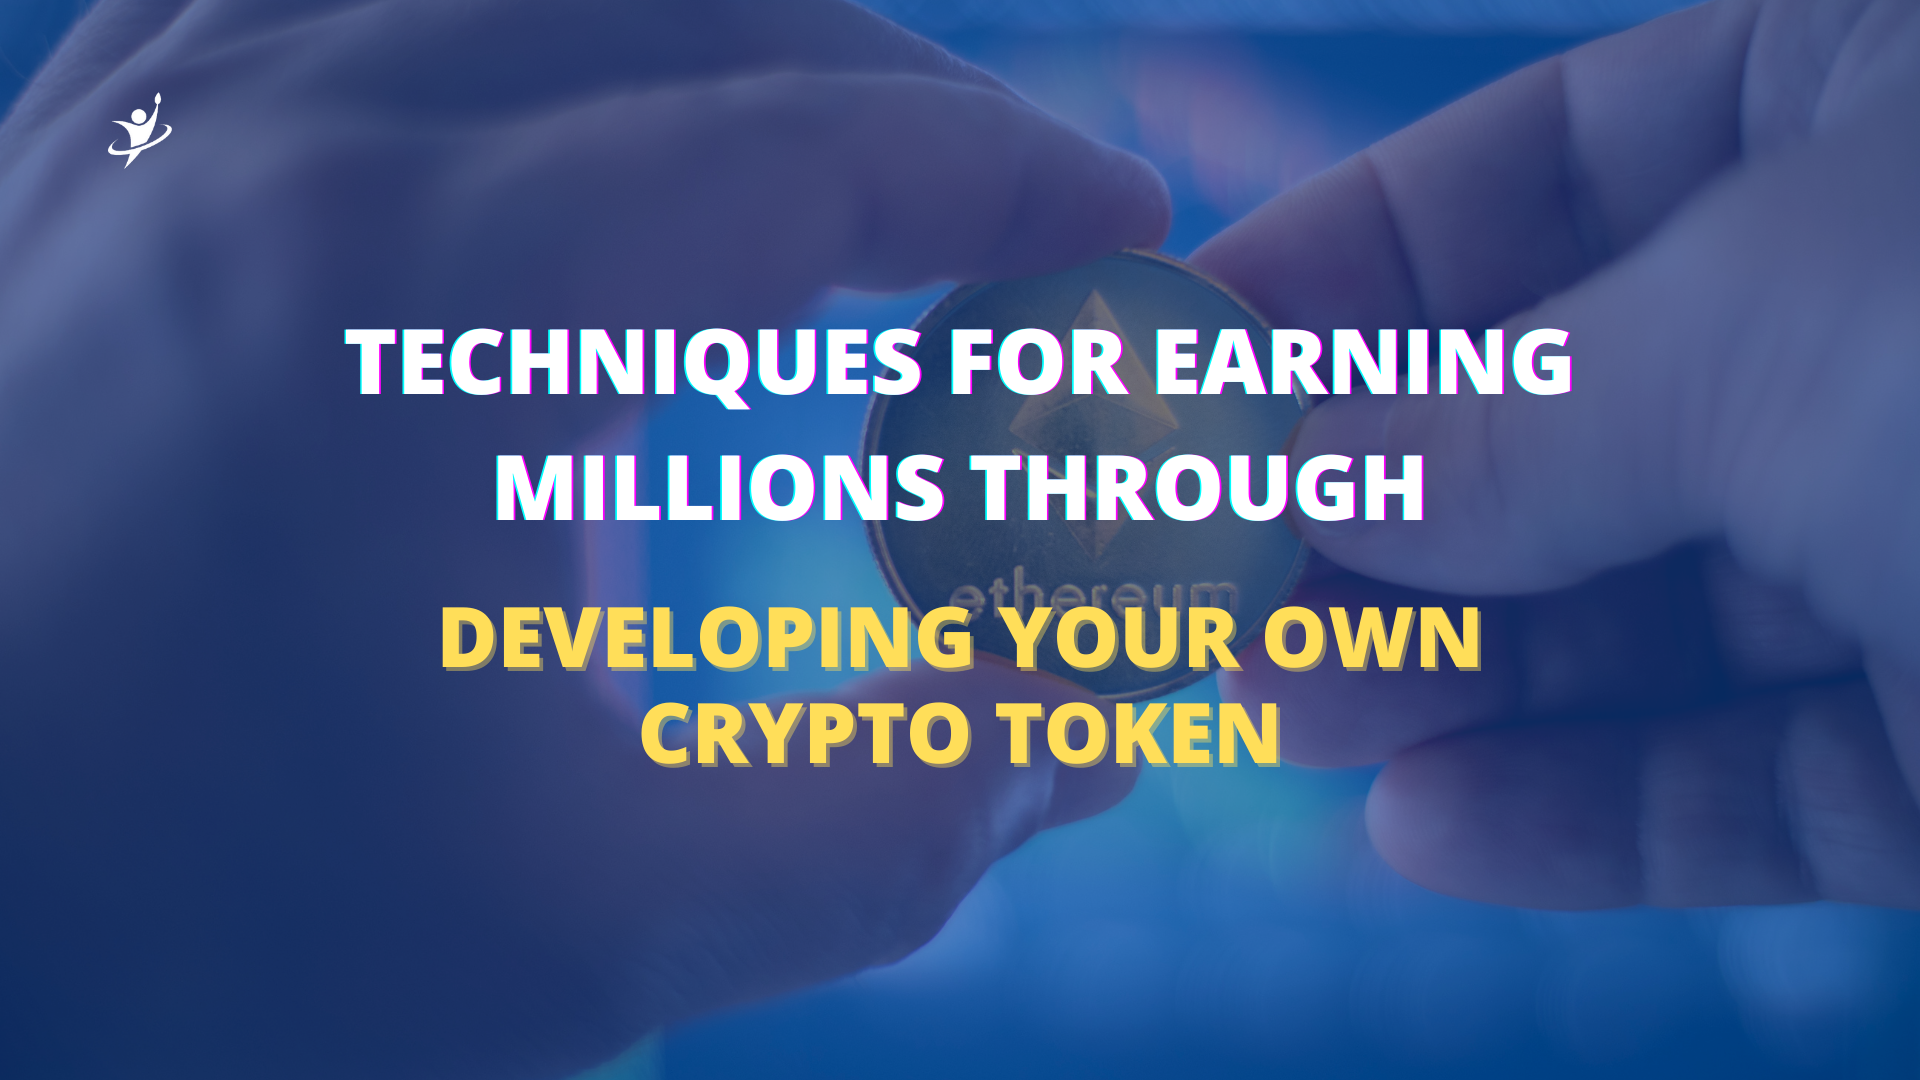 Techniques for Earning Millions through Developing Your Own Crypto Token